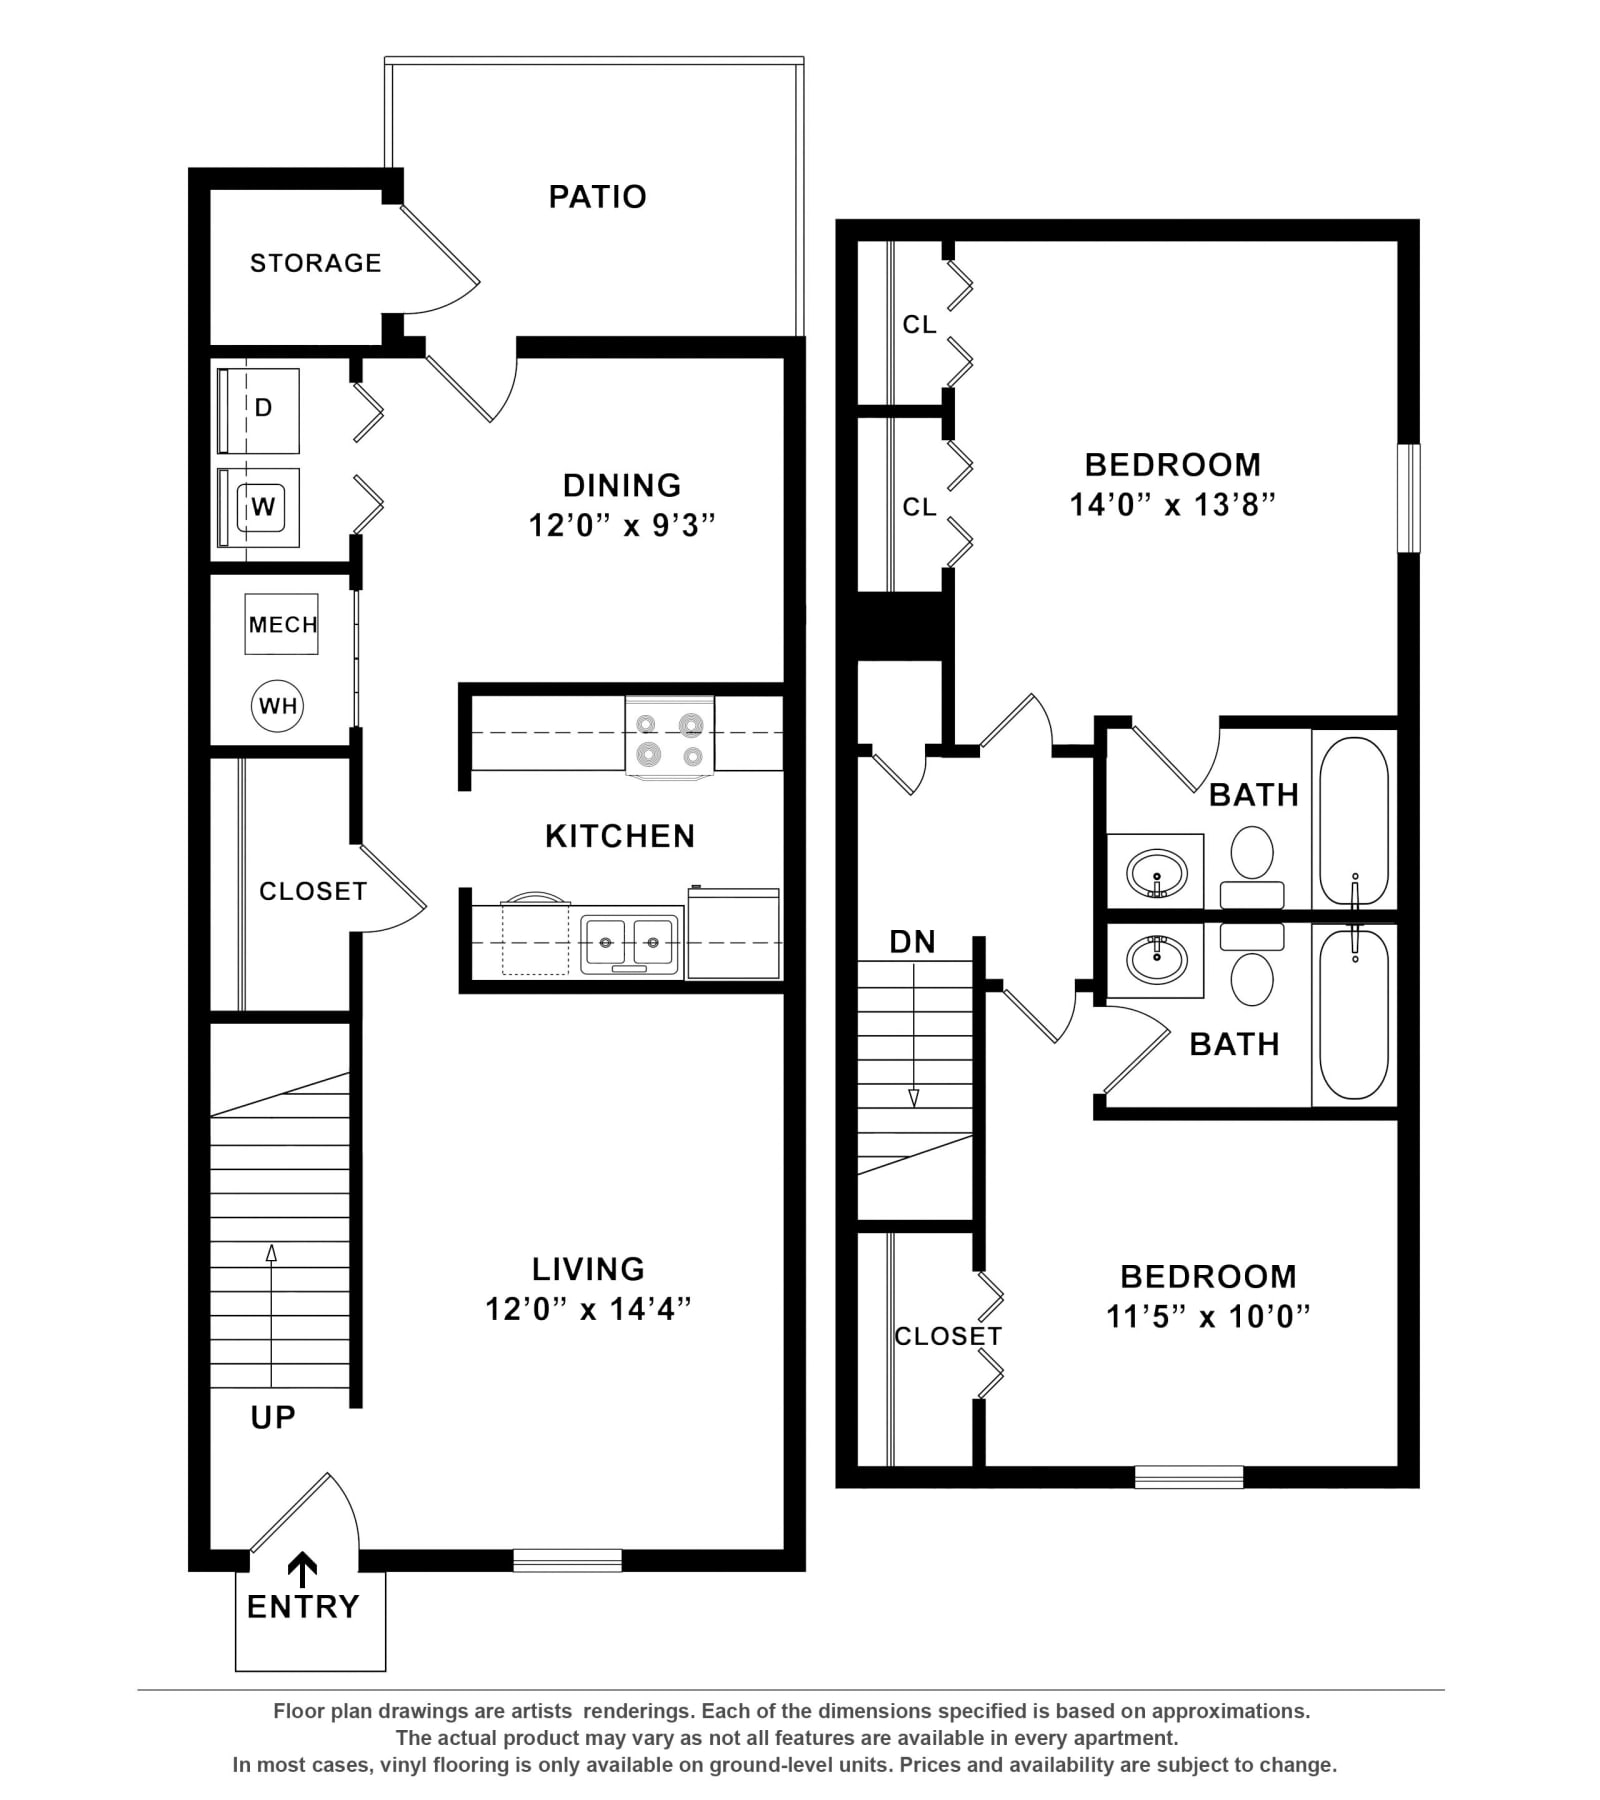 2x2 floor plan drawing at Cypress Creek Townhomes in Goodlettsville, Tennessee